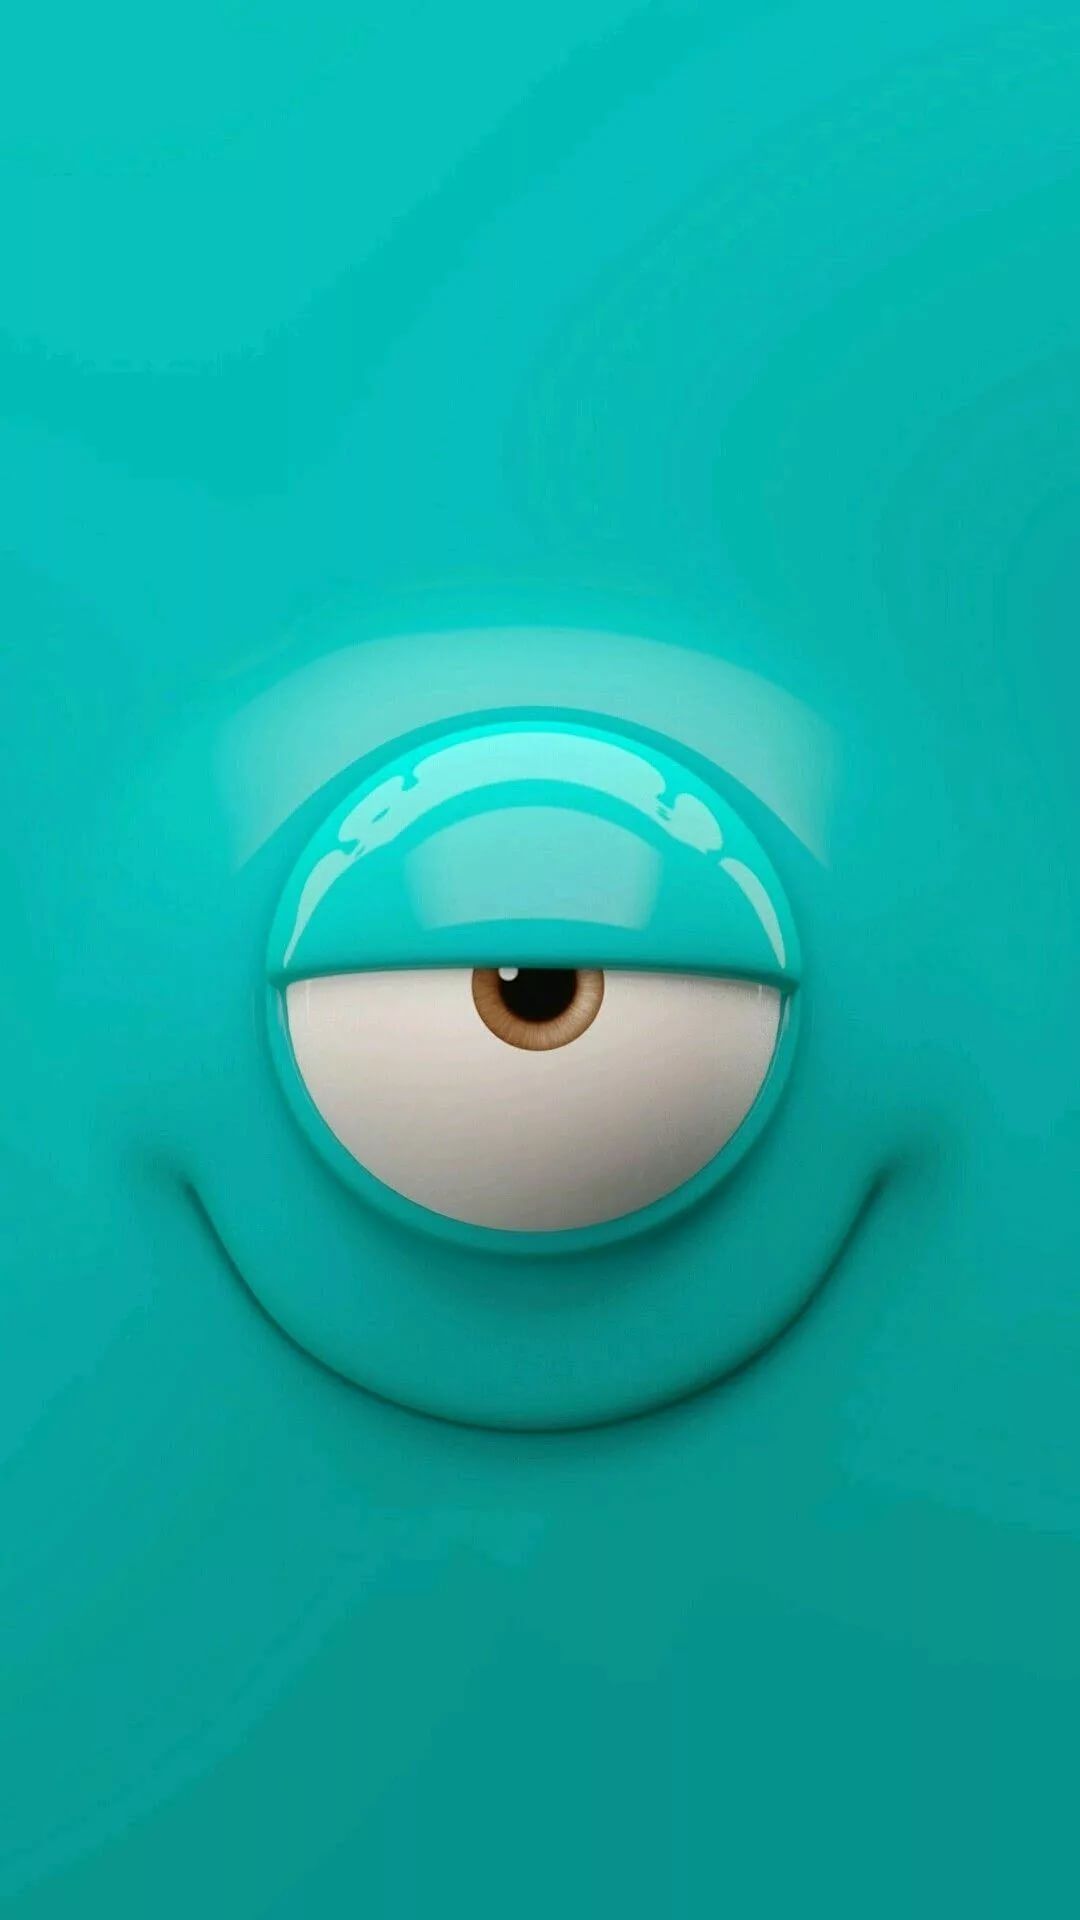 Funny wallpaper for android